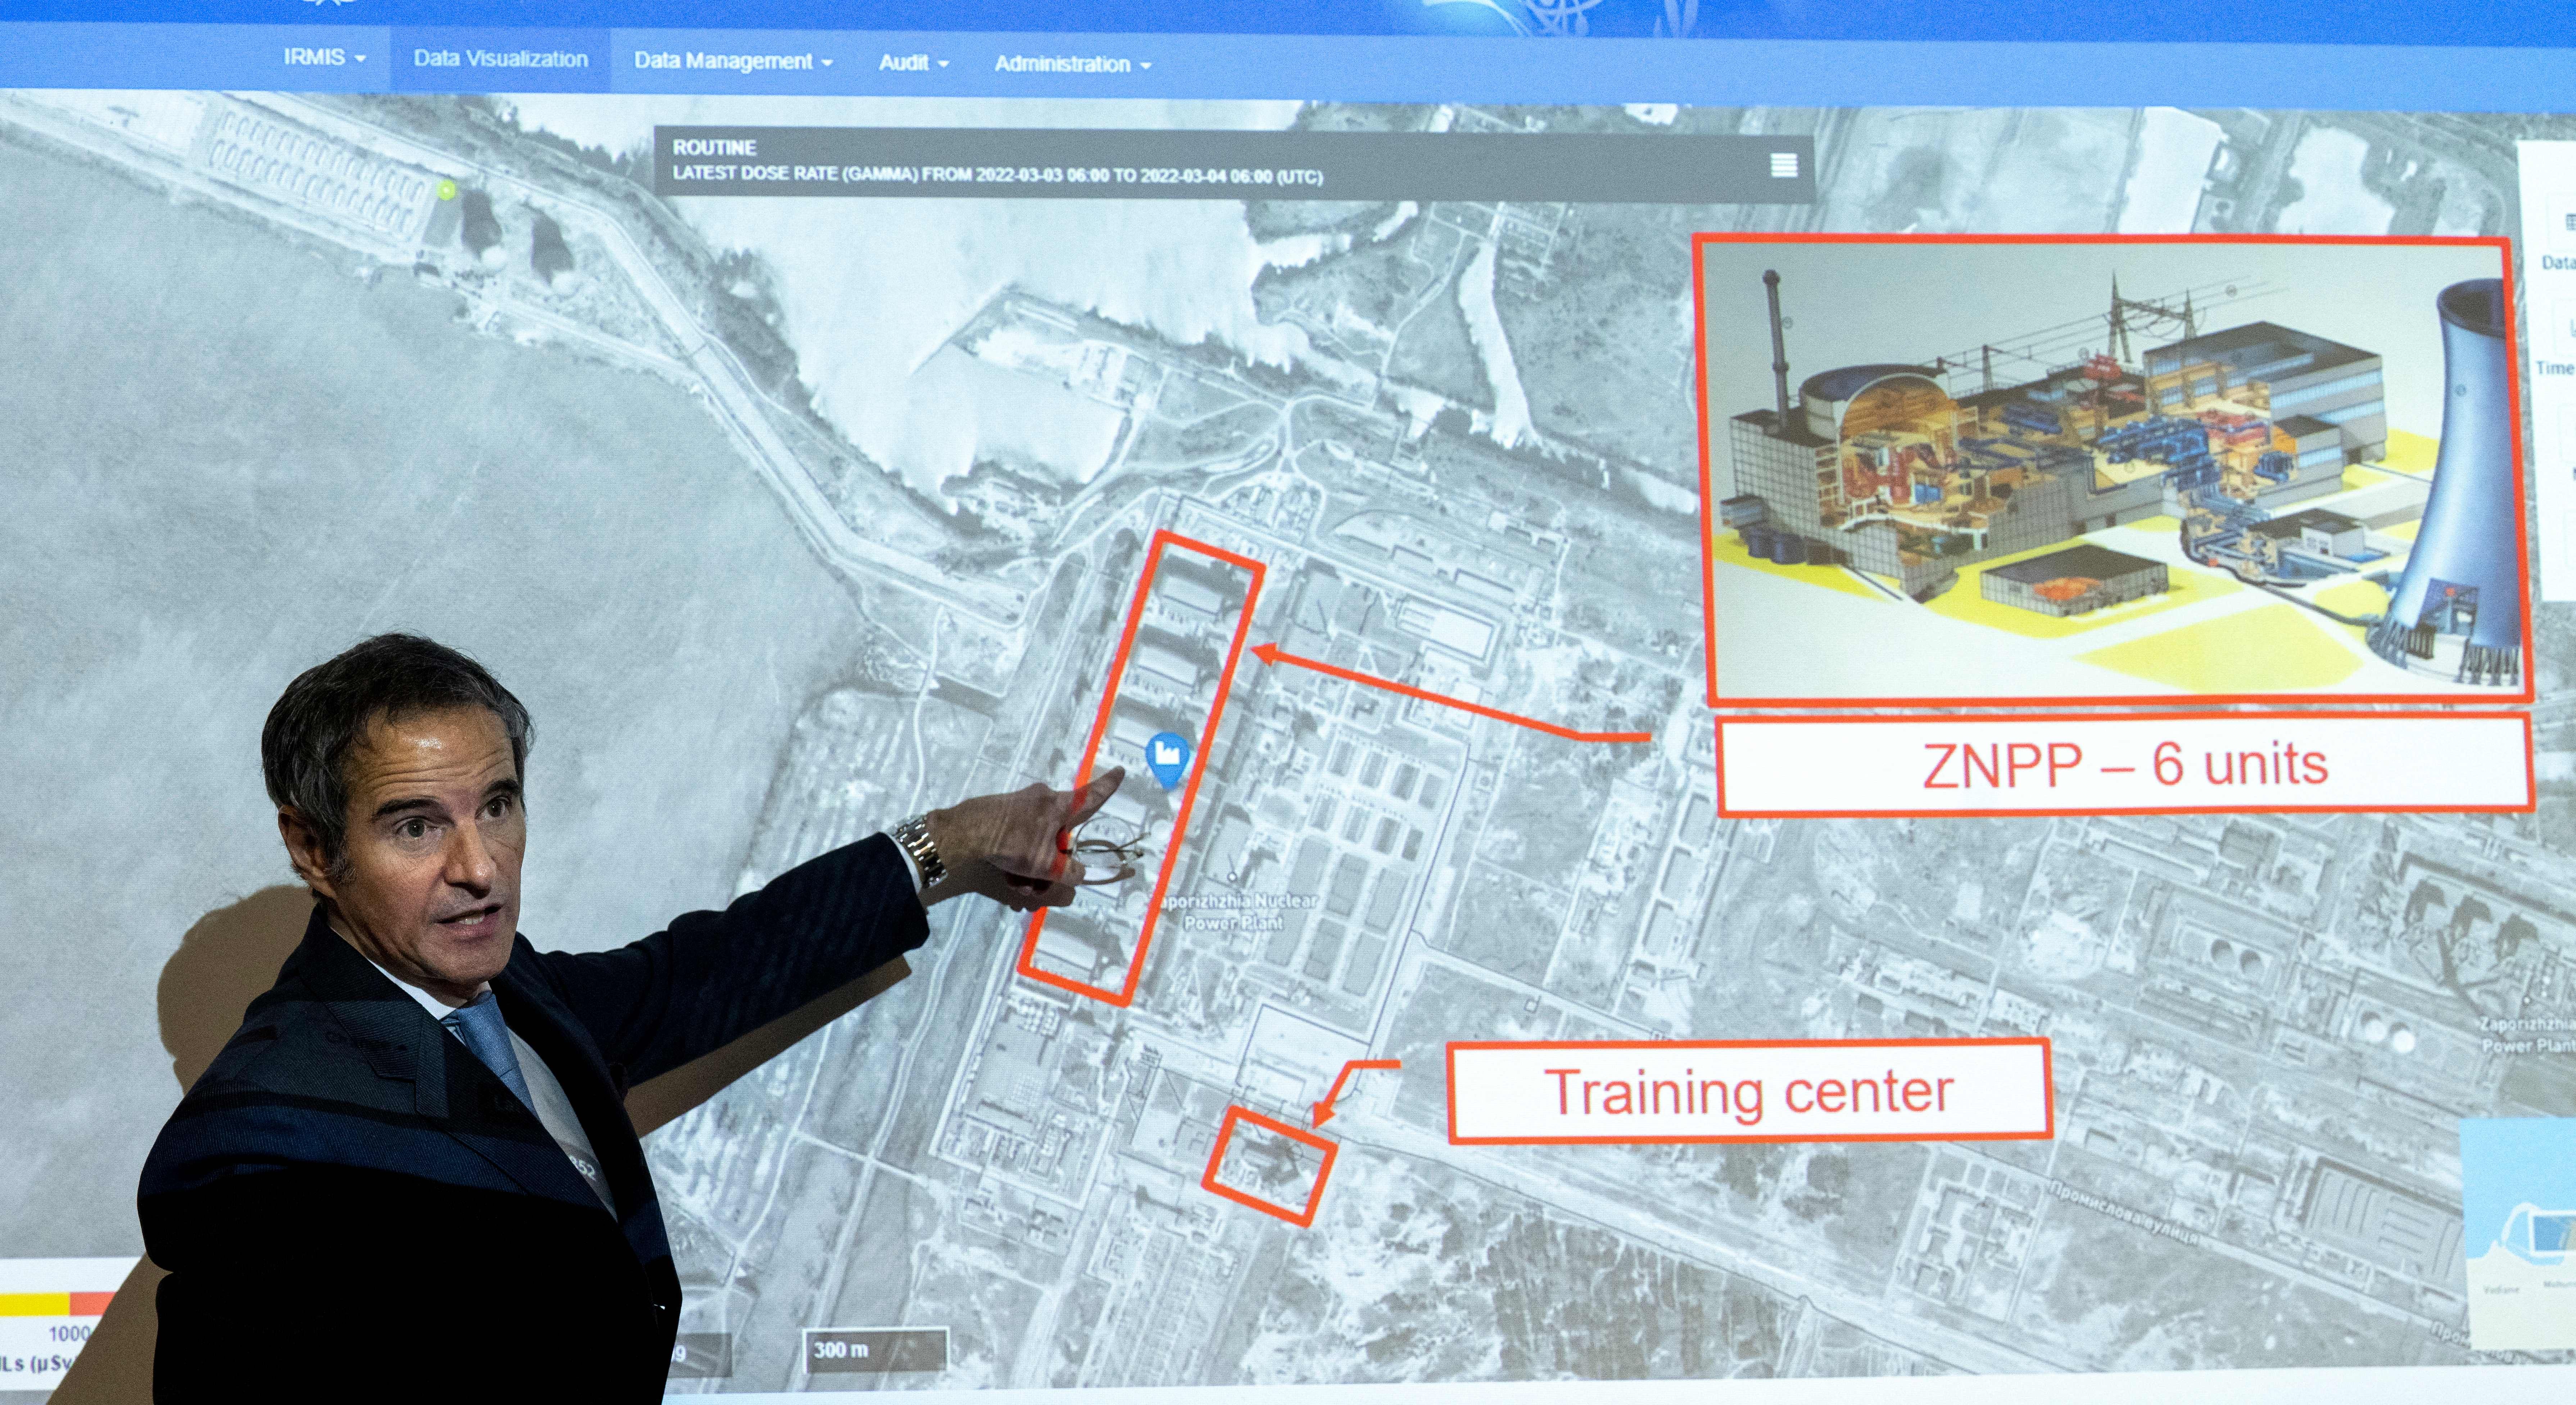 Rafael Grossi, Director General of the International Atomic Energy Agency, in Austria points on a map of the Ukrainian Zaporizhzhia nuclear power plant in Ukraine.